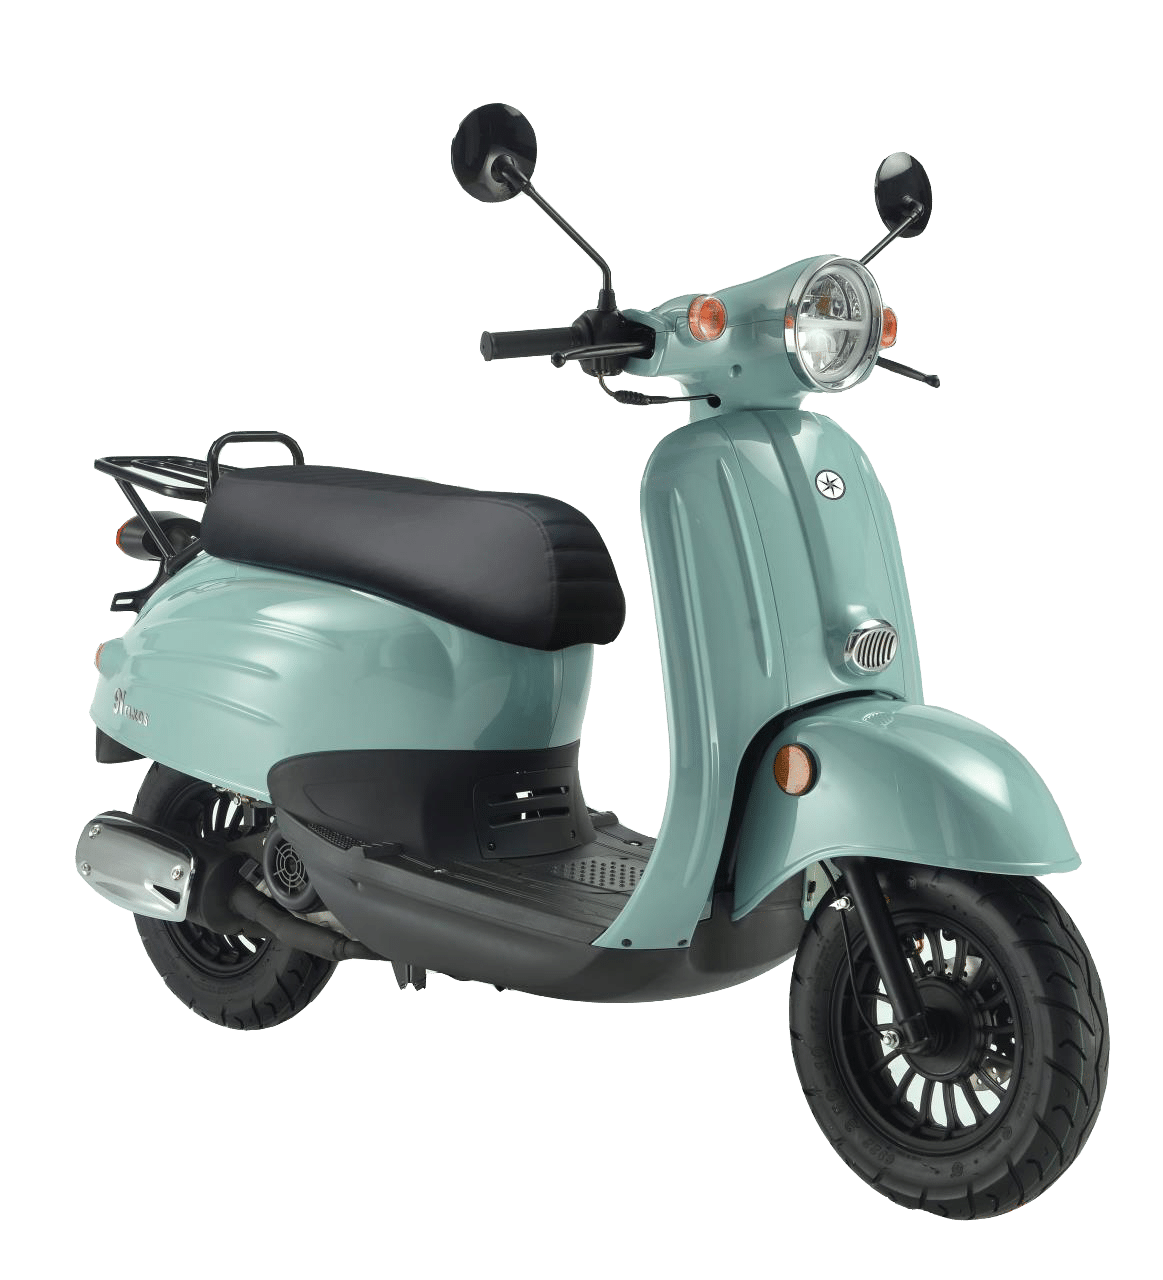 IMF INDUSTRIE - scooter -scooter thermique - 100% moto - Peugeot - SYM - KYMCO